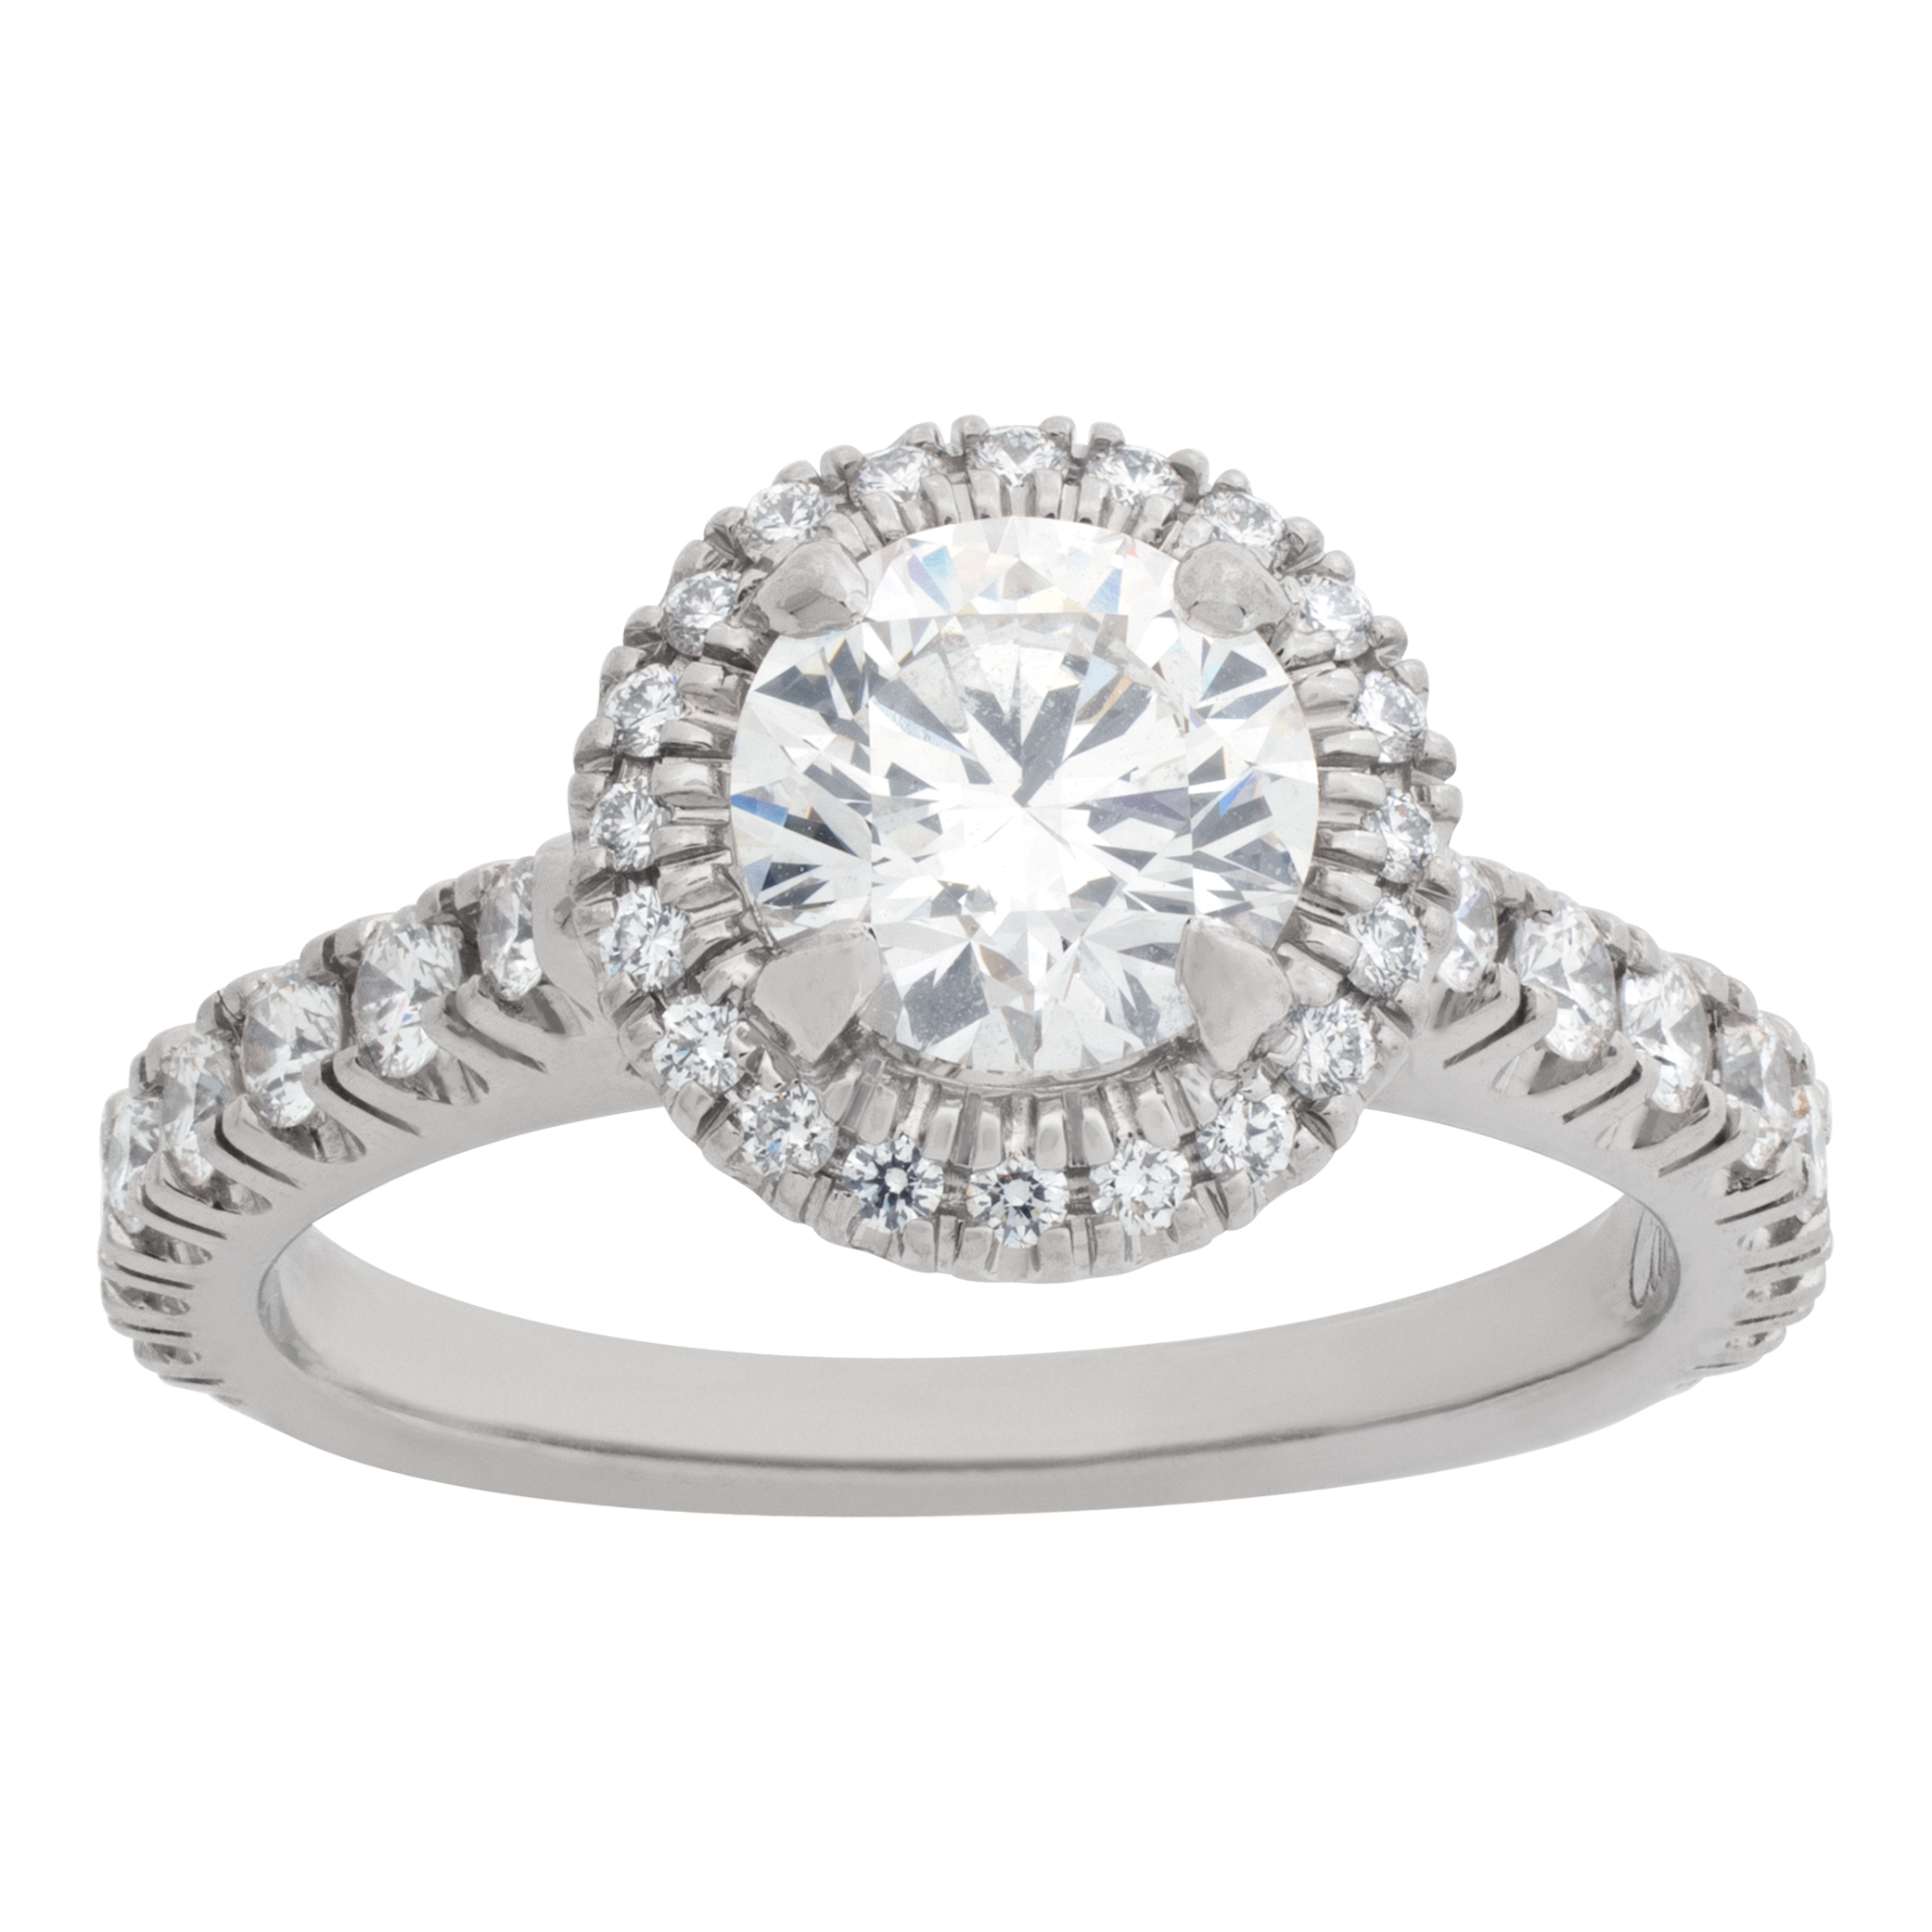 Cartier "Destinee" collection, GIA certified 0.73 carat full ct round brilliant diamond set in a halo platinum setting.